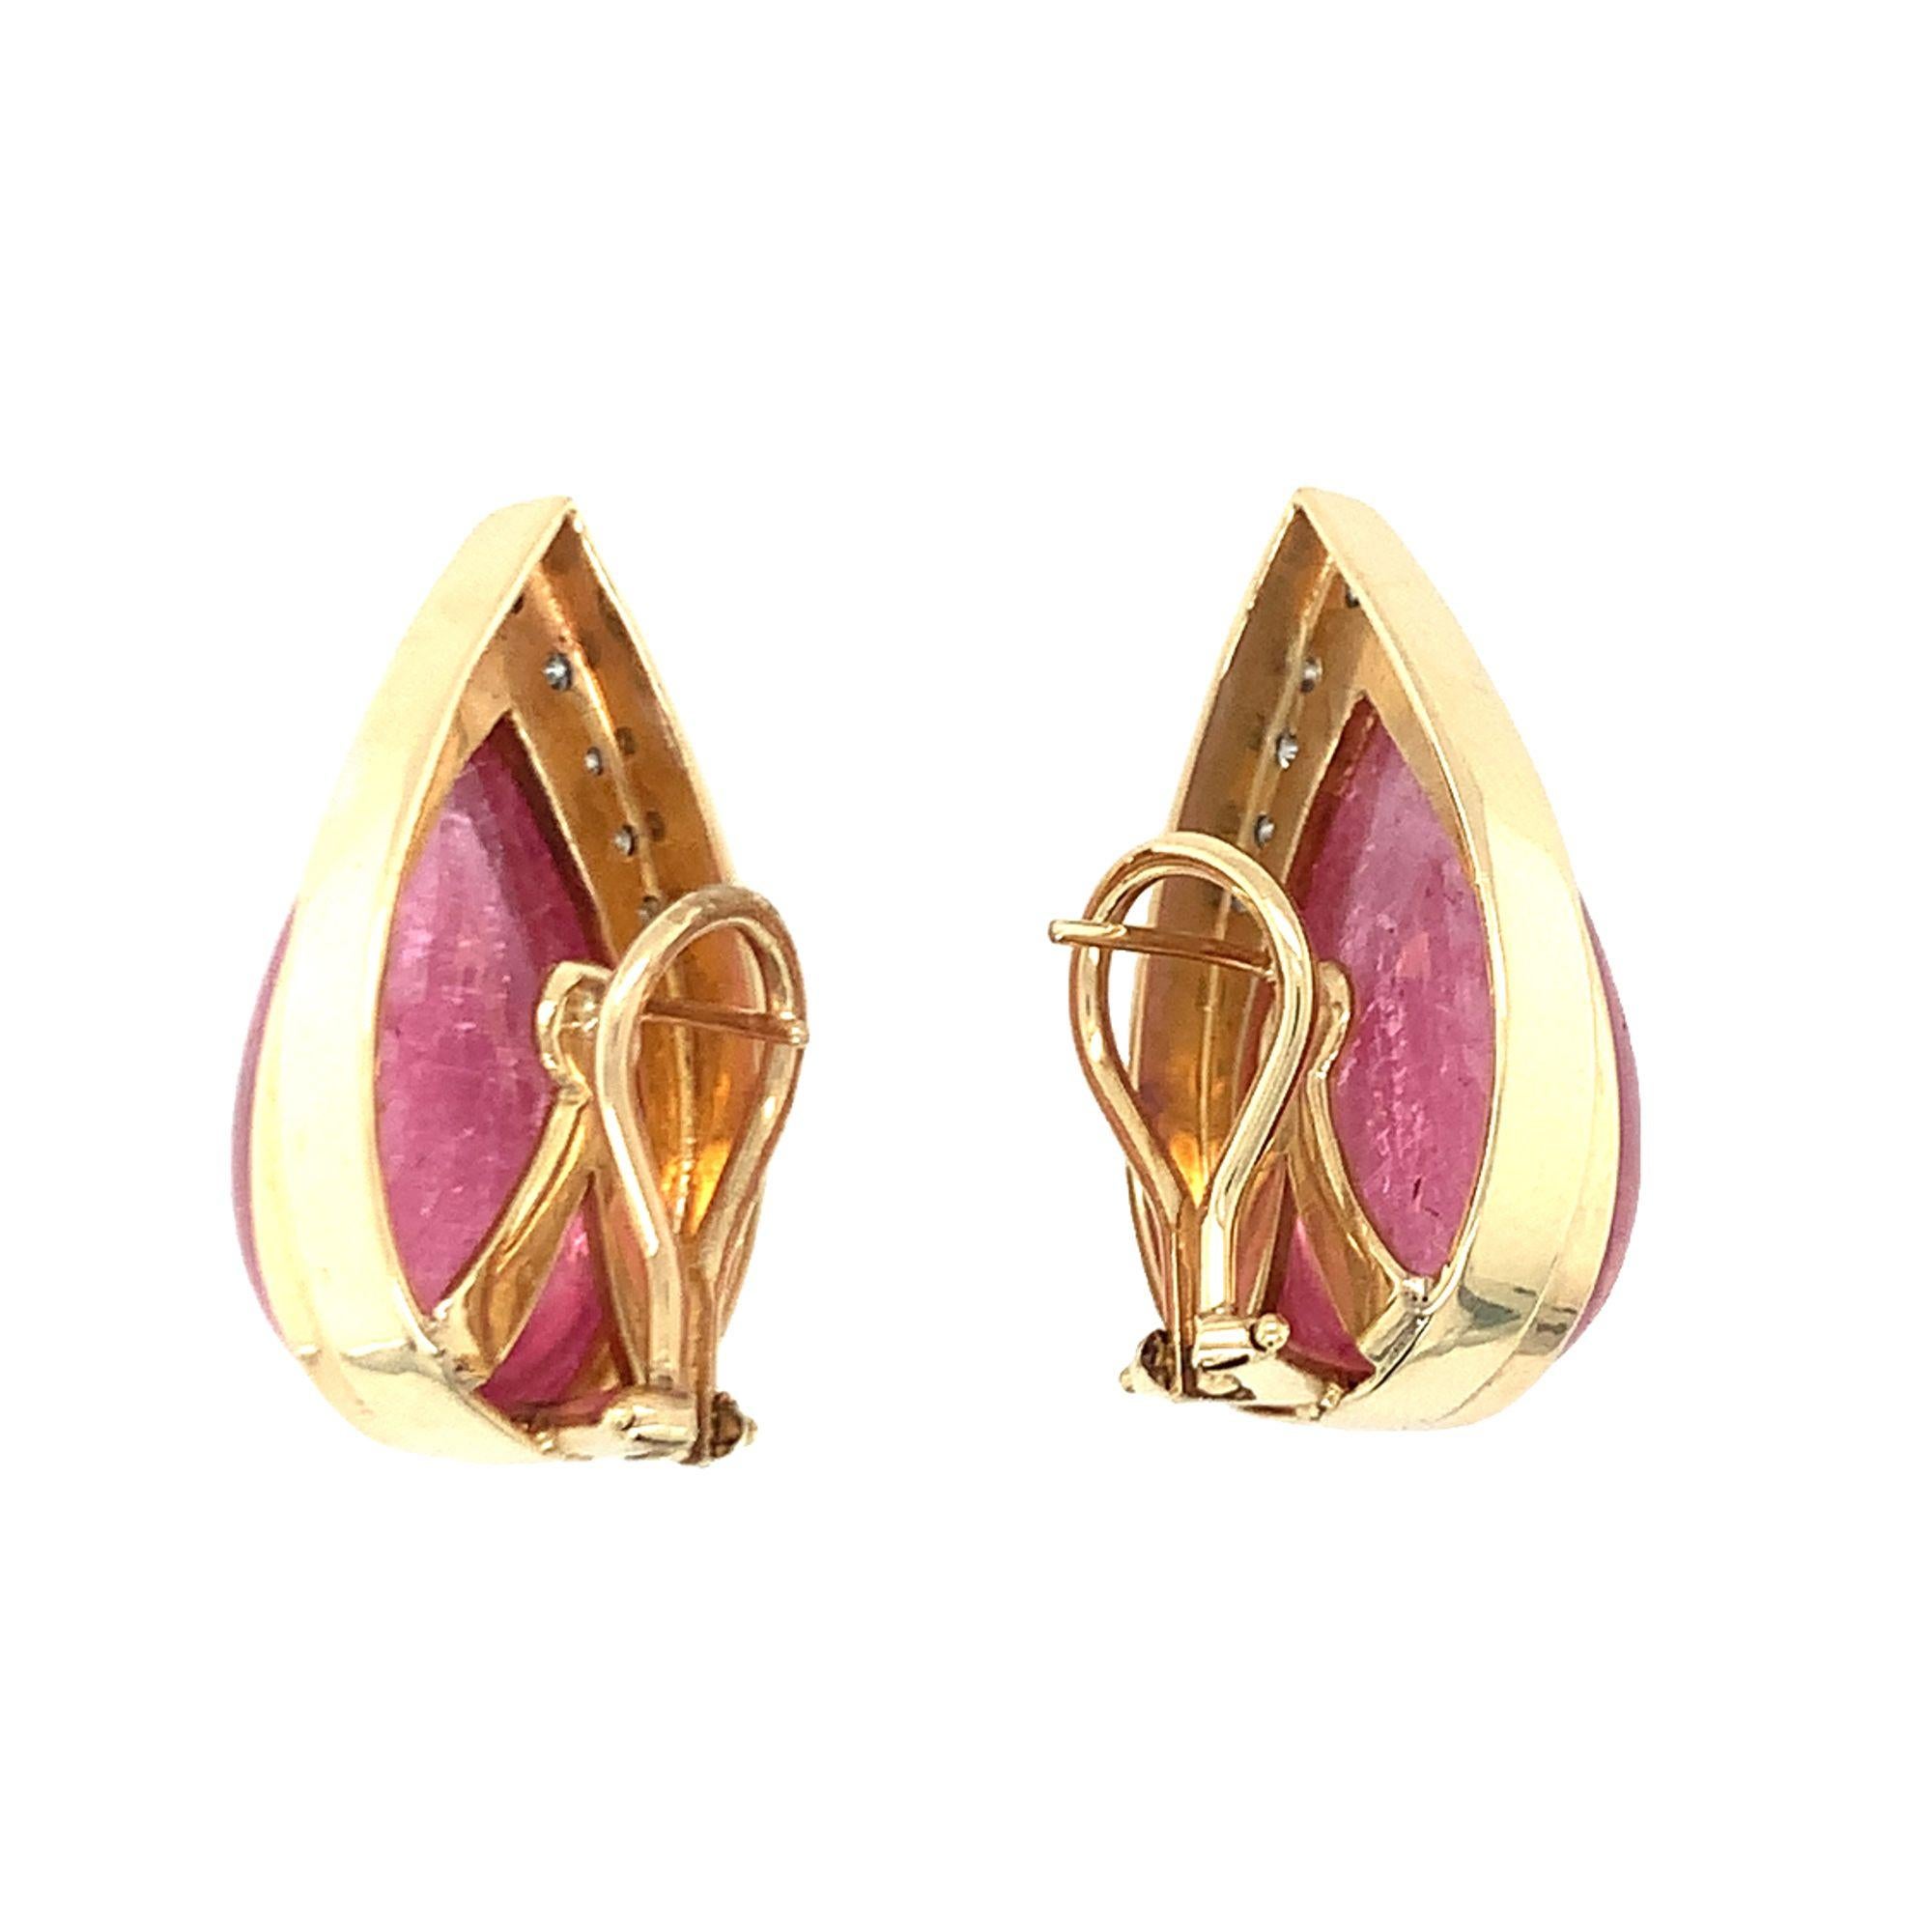 One pair of pink tourmaline and diamond earrings featuring two pear-shaped cabochon tourmalines totaling 40 ct. accented by 18 round brilliant cut diamonds totaling 0.55 ct. With Omega backs and posts. Circa 1970s.

Vibrant, designer,